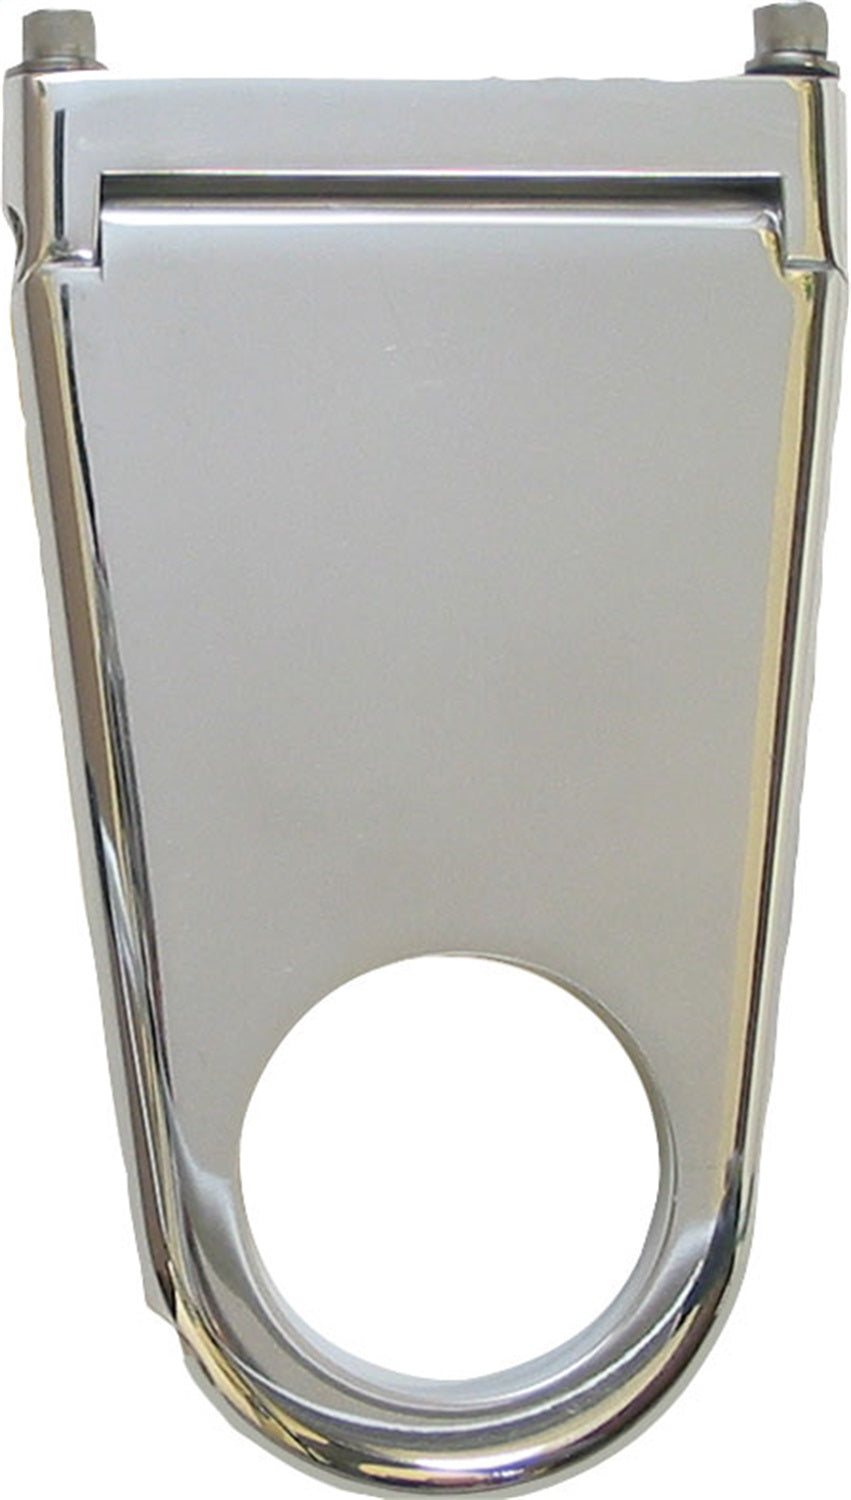 Borgeson Column Drop Blank Style 1-3/4in. Column X 6in. Drop Polished Aluminum 911176